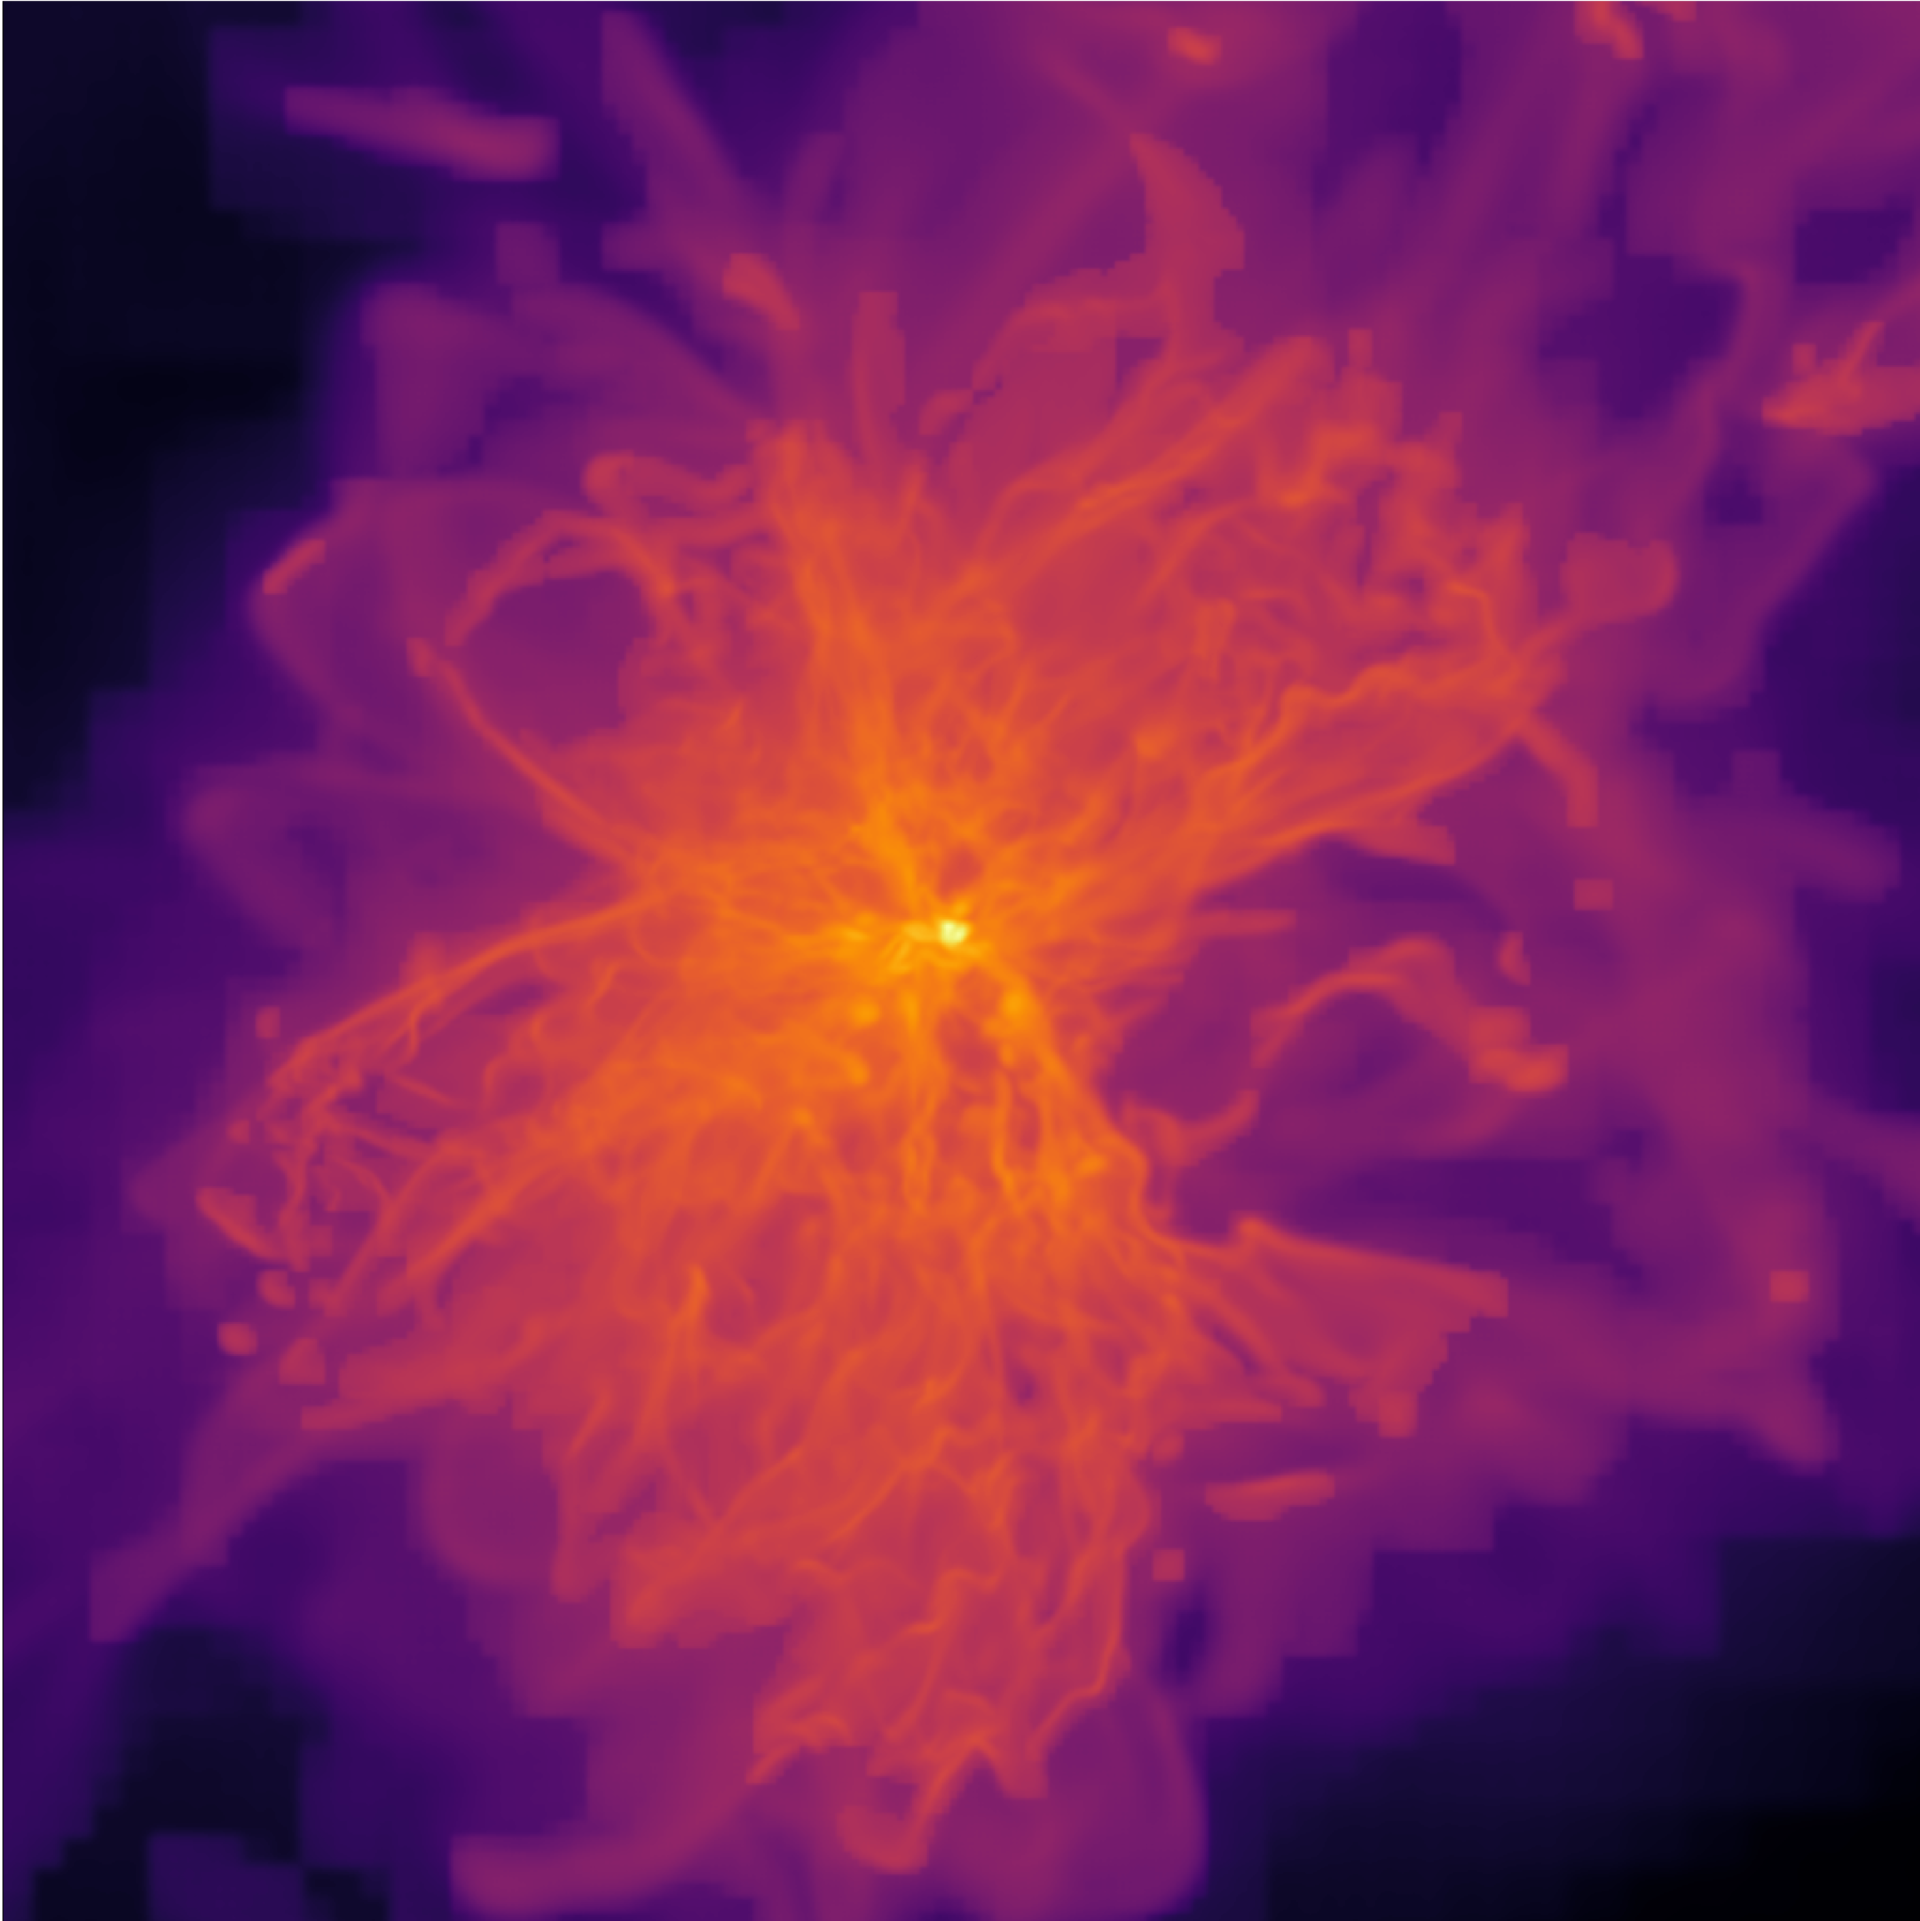 simulation of a molecular cloud. It shows red, yellow flame-like structures